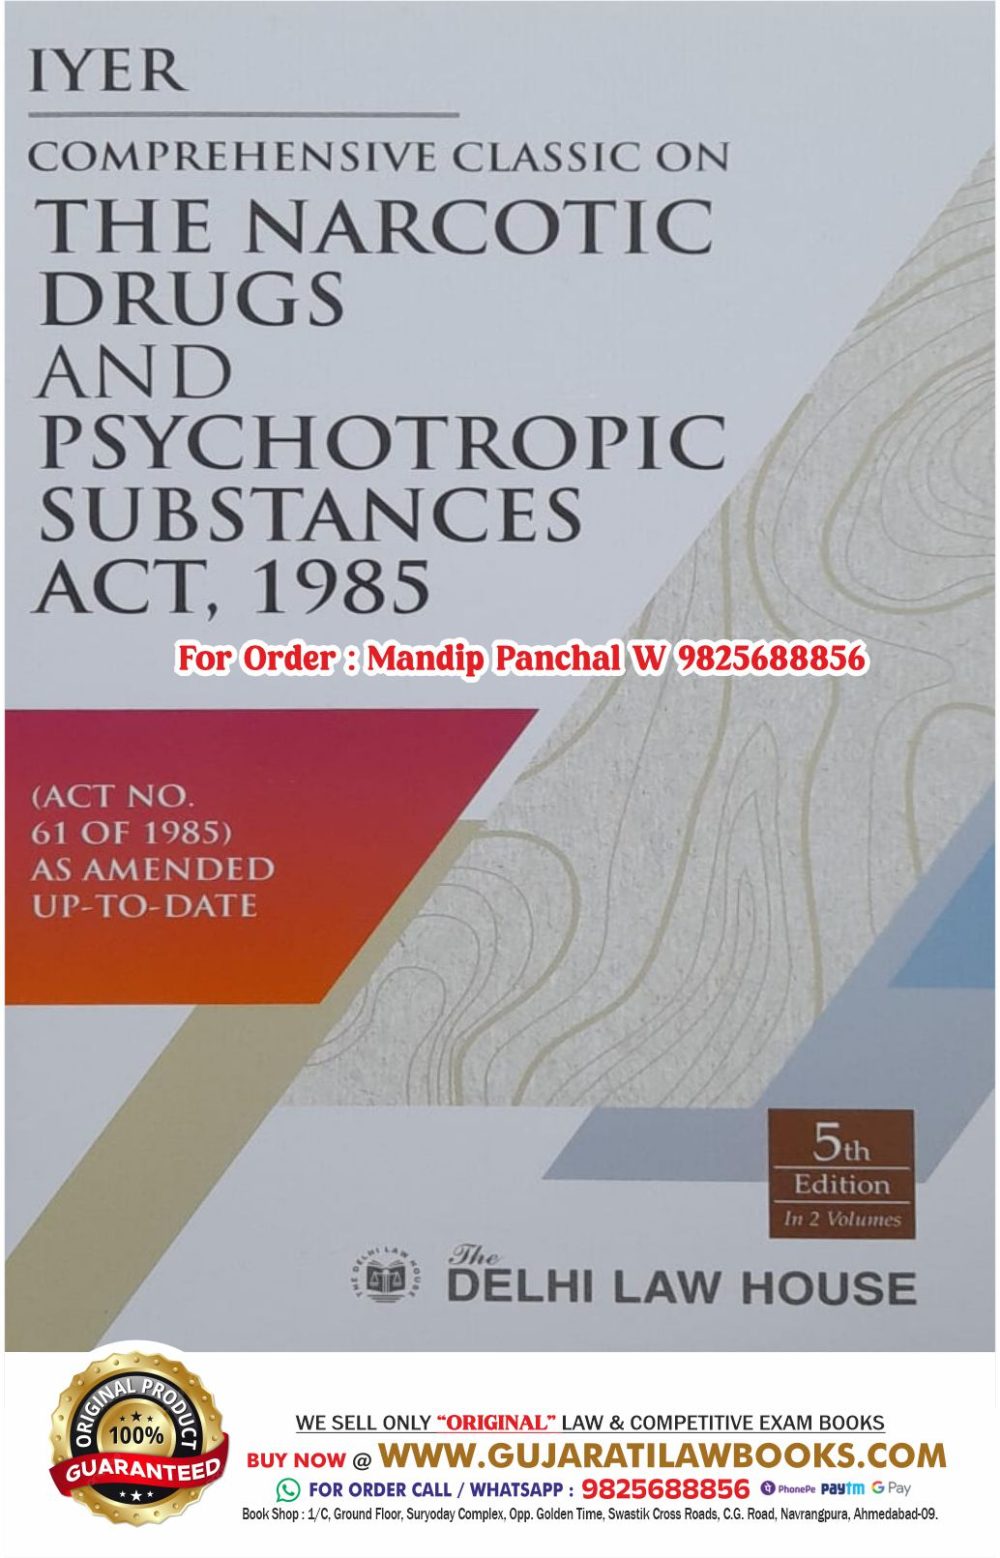 Iyer's COMPREHENSIVE CLASSIC ON THE NARCOTIC DRUGS AND PSYCHOTROPIC SUBSTANCES ACT, 1985 - (in 2 Volumes) Latest 5th Edition March 2024 Delhi Law House